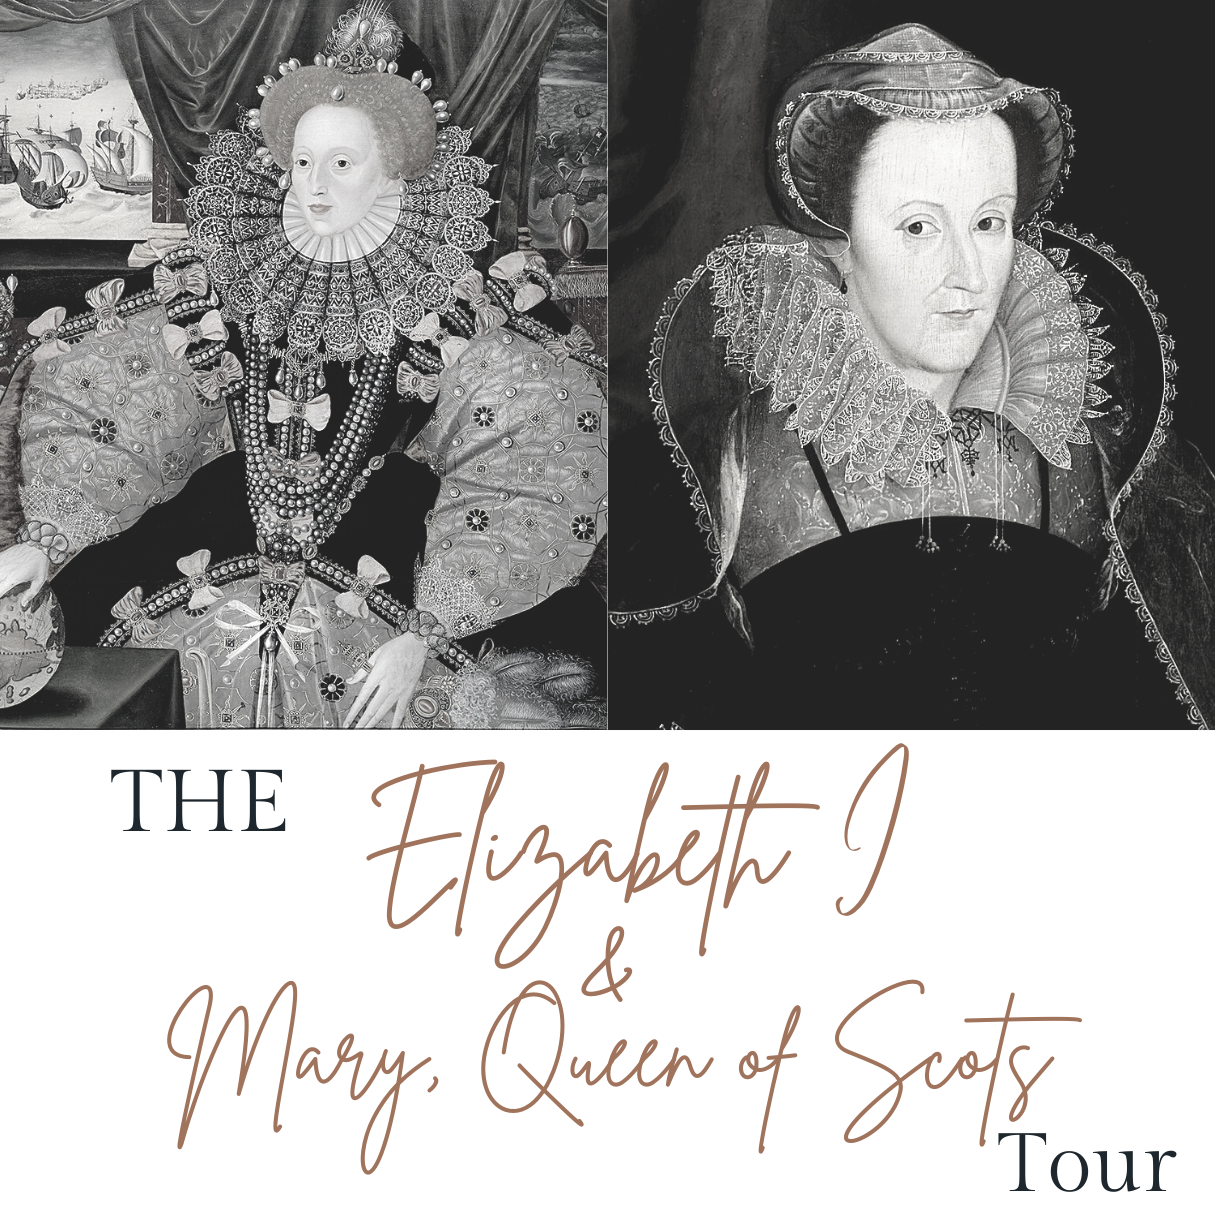 The Elizabeth I and Mary, Queen of Scots